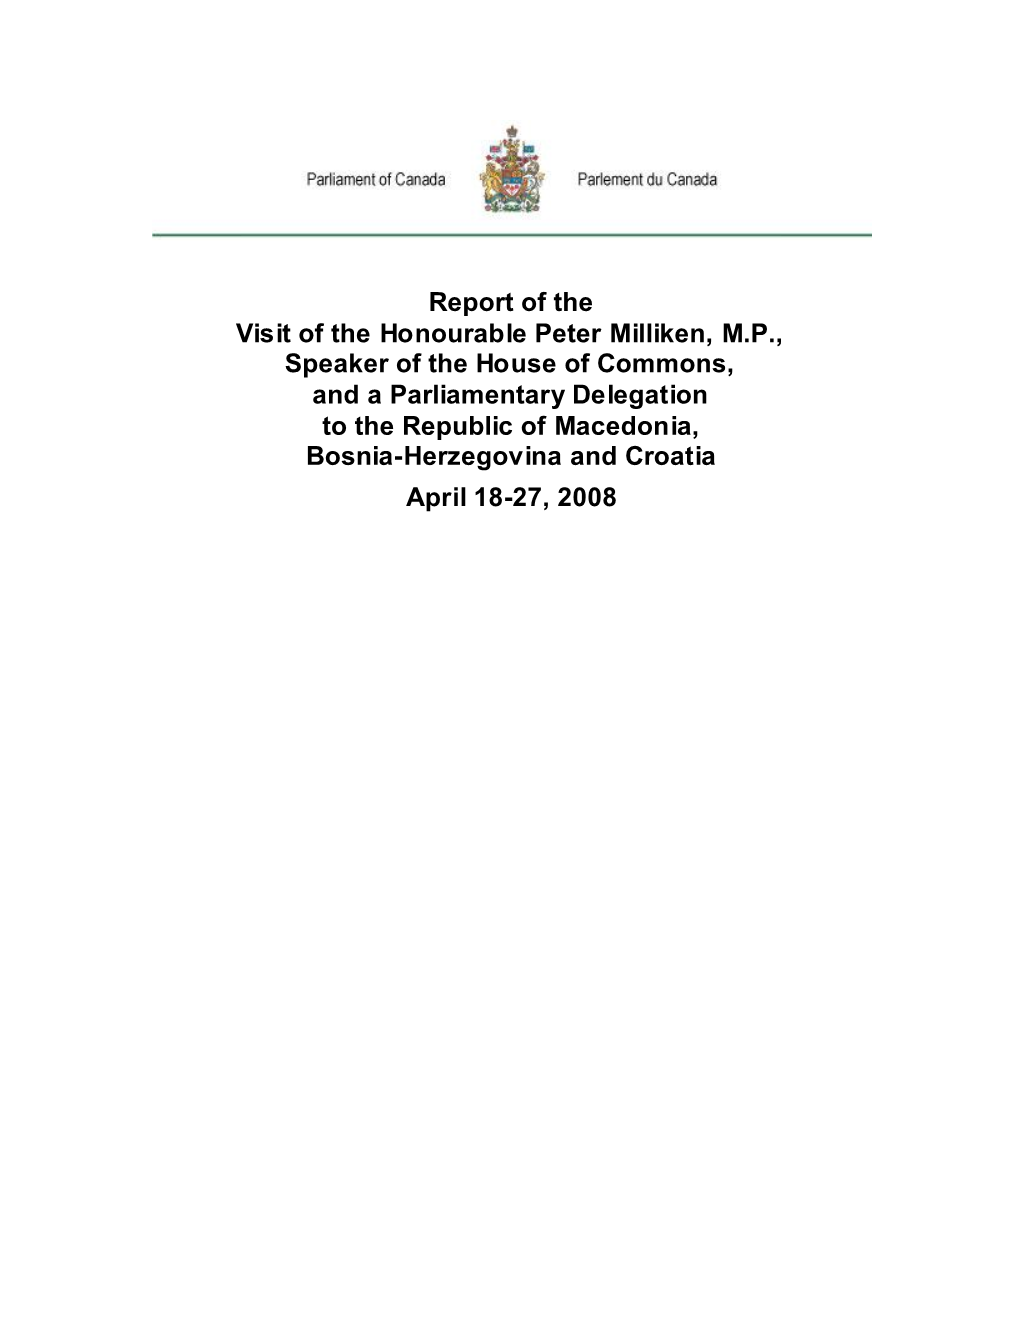 Report of the Visit of the Honourable Peter Milliken, M.P., Speaker of The